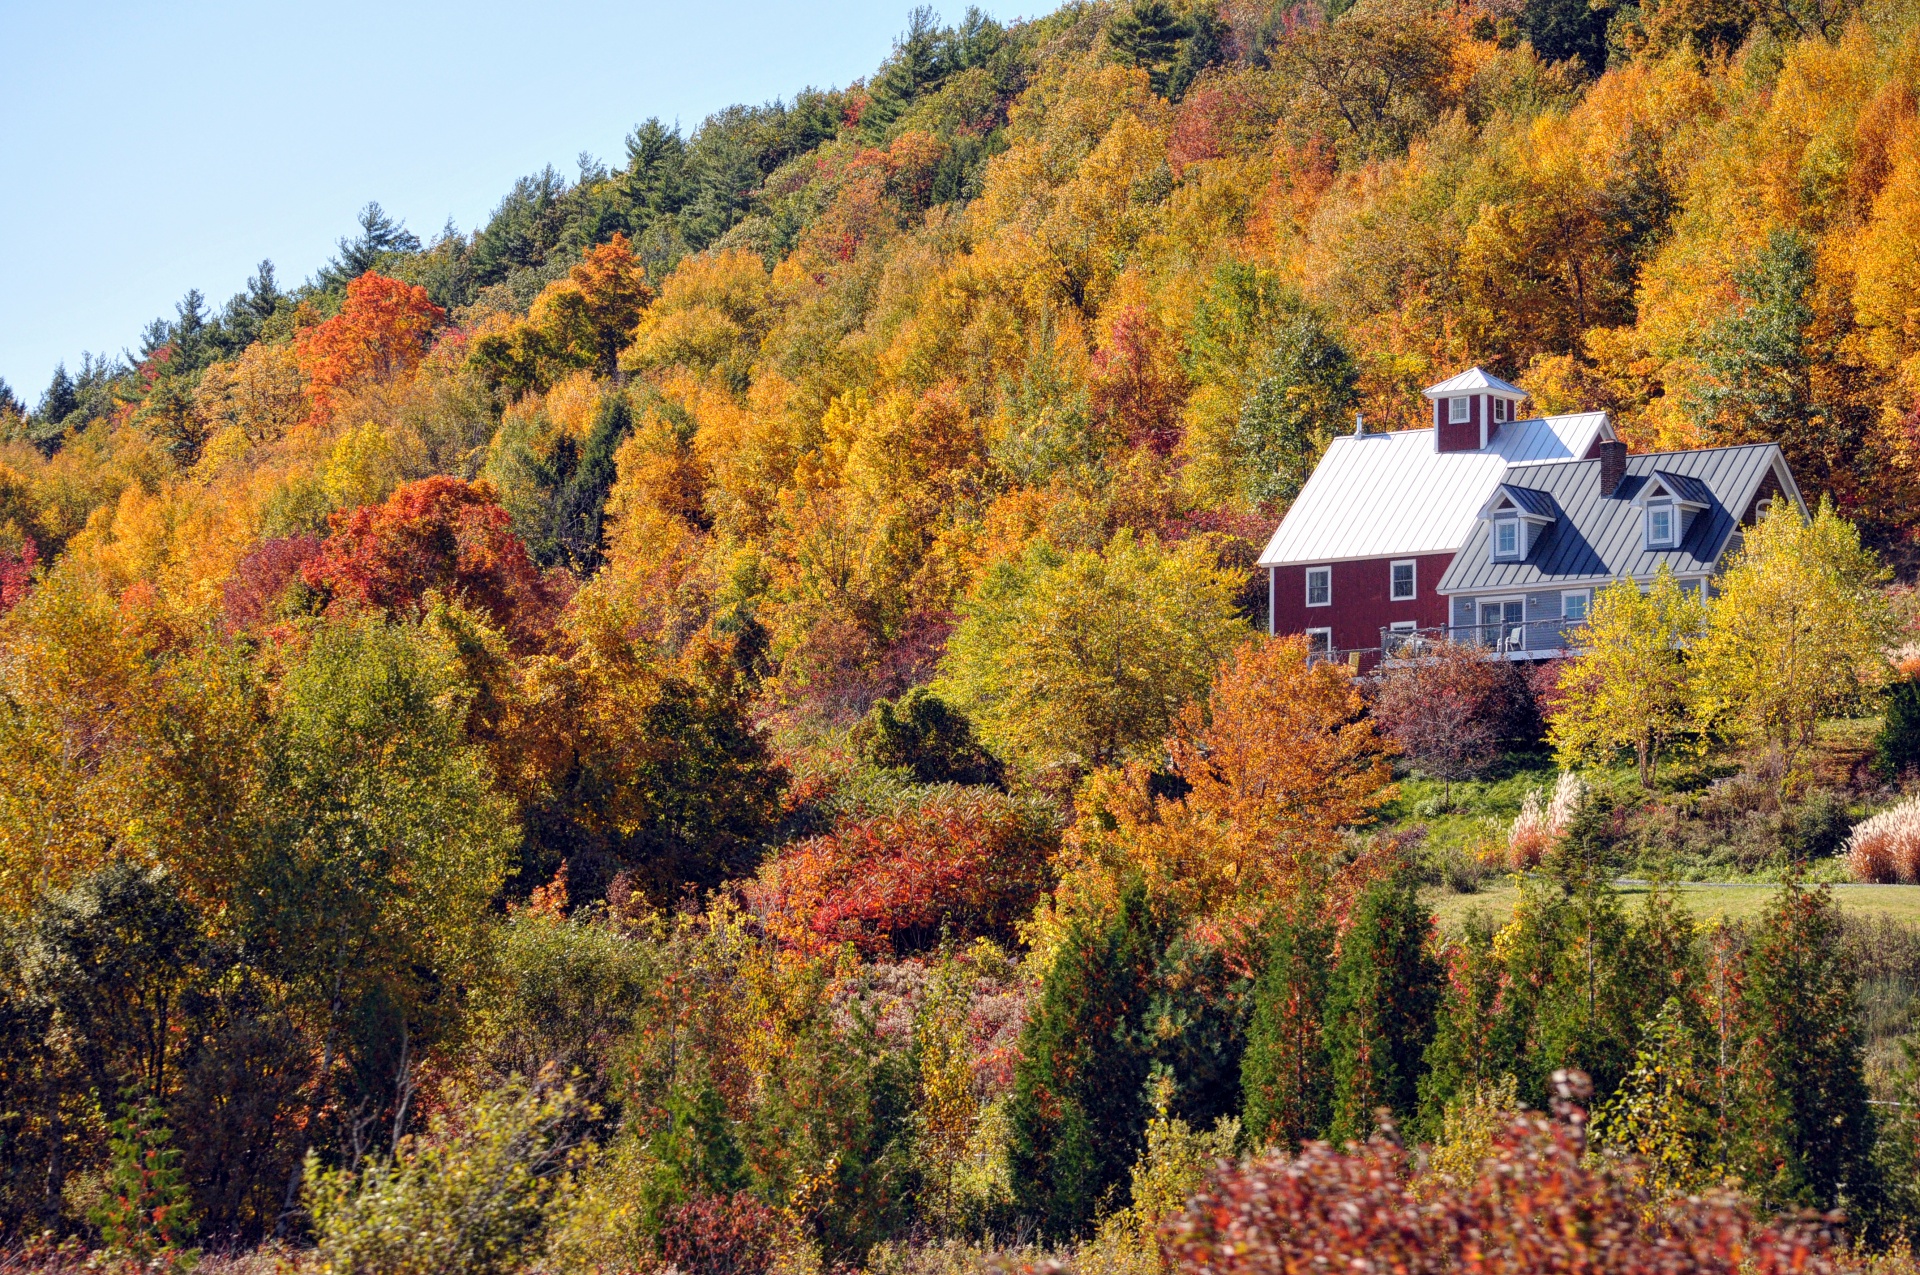 Home Nestled In Fall Foliage